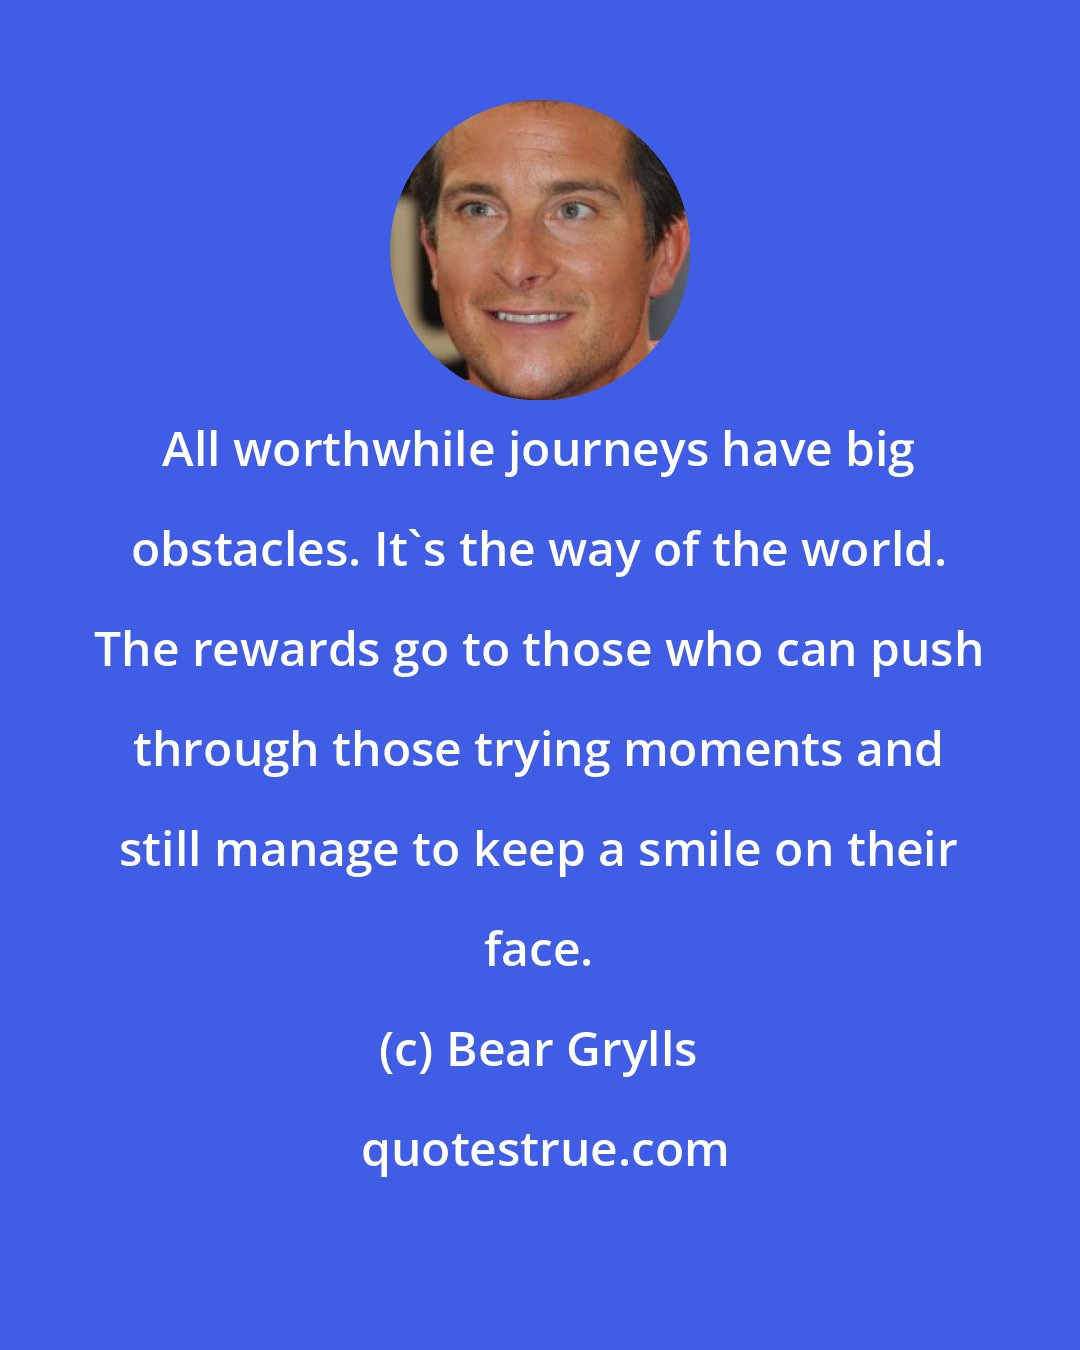 Bear Grylls: All worthwhile journeys have big obstacles. It's the way of the world. The rewards go to those who can push through those trying moments and still manage to keep a smile on their face.